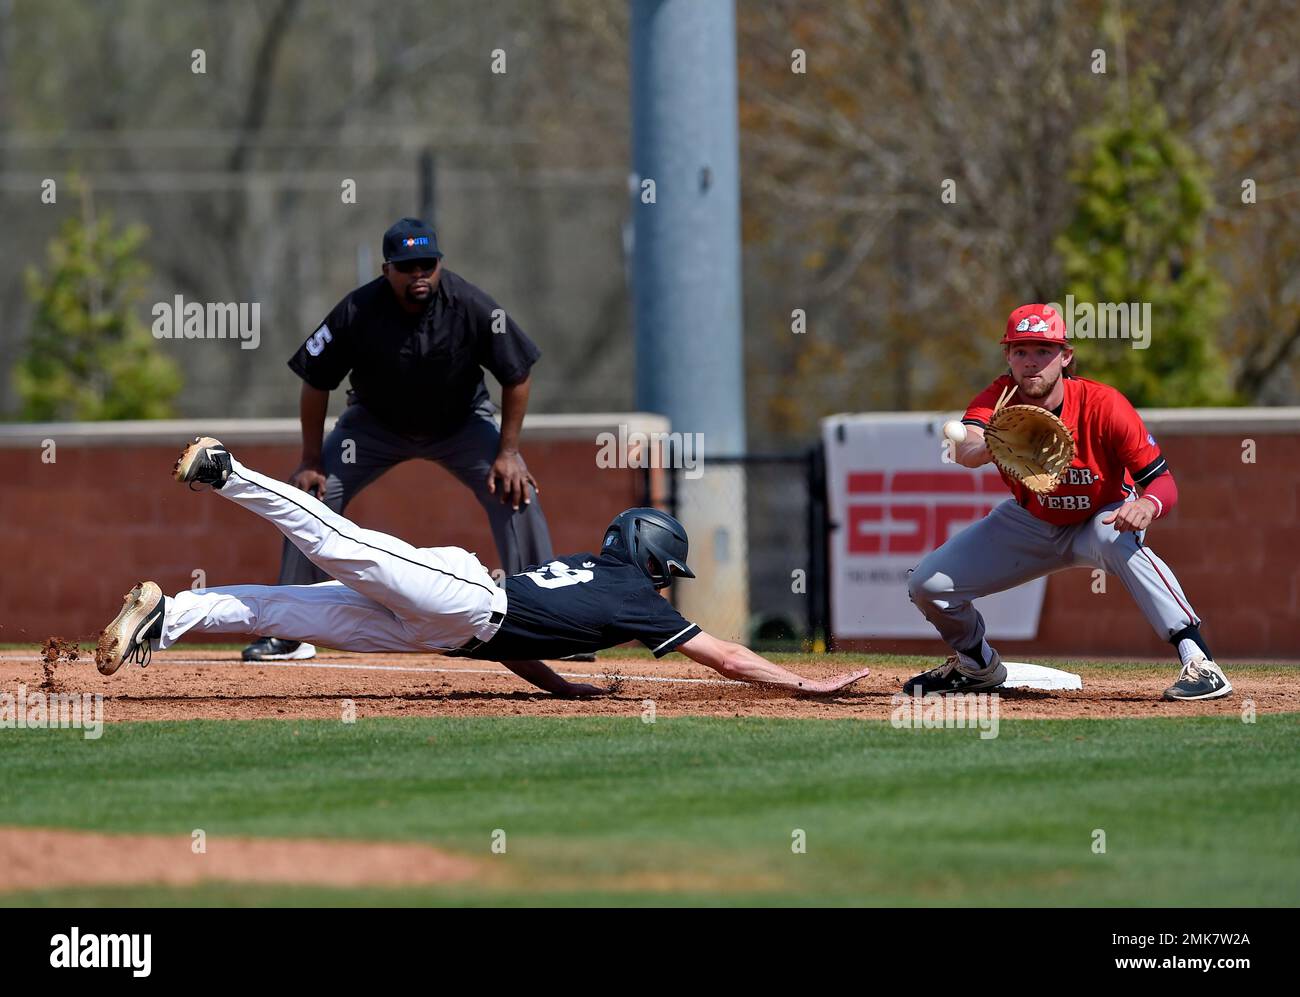 USC Upstate's Garrett Wallace dives back to first base while Gardner-Webb's Corey Howard waits on the ball during an NCAA college baseball game Gardner-Webb, March 30, 2019, in Spartanburg, S.C. (